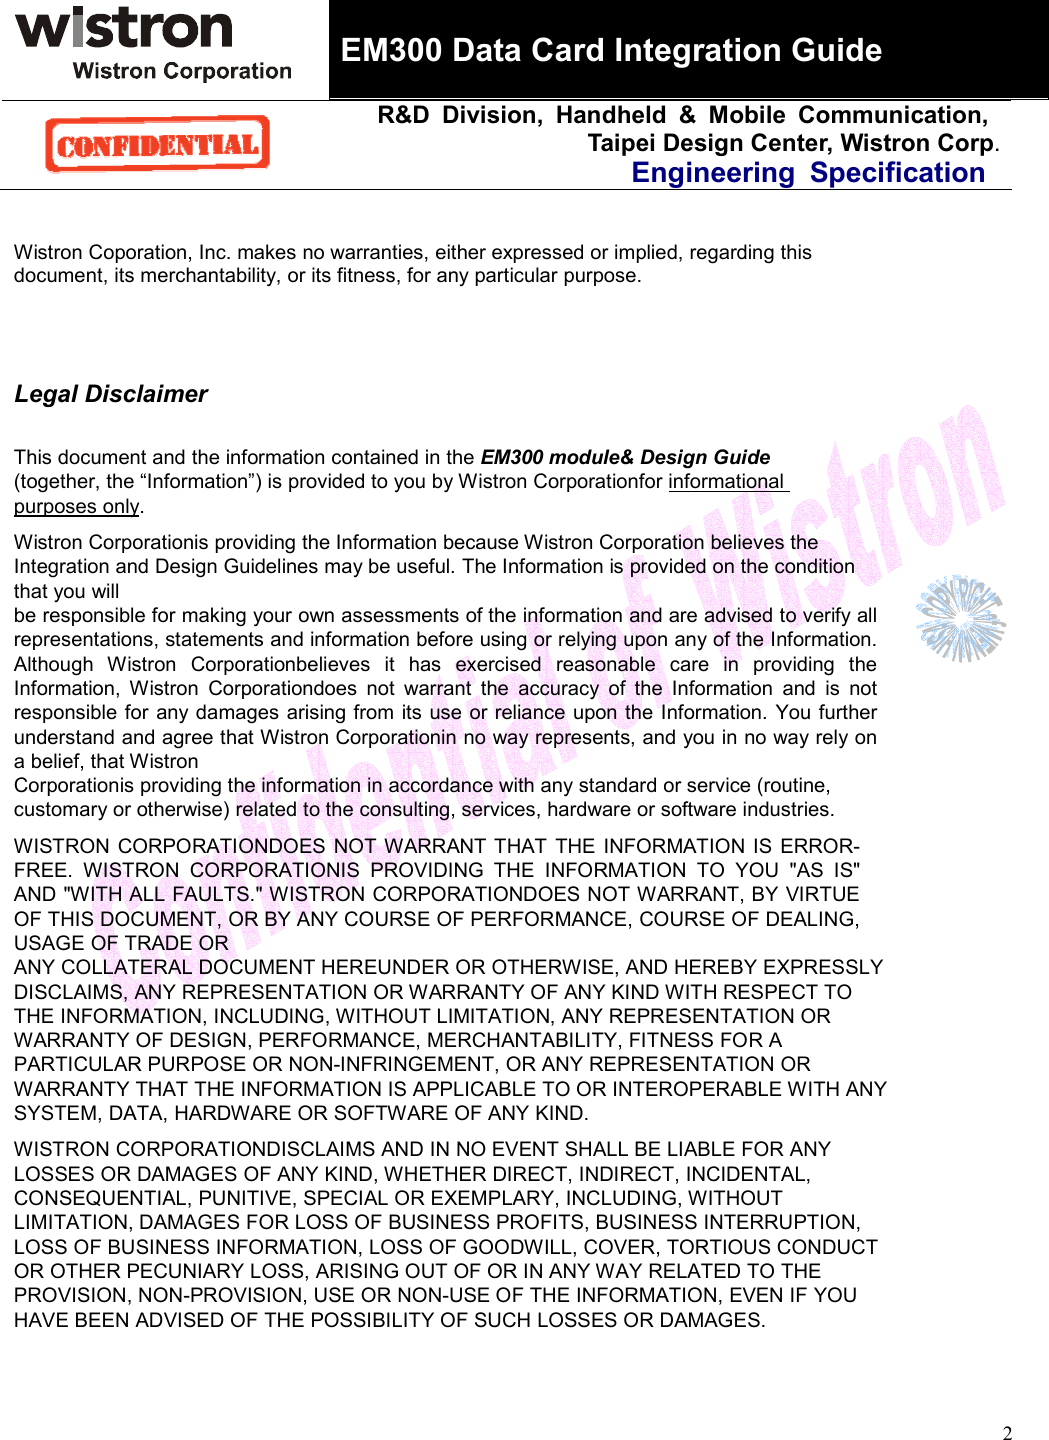 EM300 Data Card Integration GuideR&amp;D Division, Handheld &amp; Mobile Communication, Taipei Design Center, Wistron Corp.Engineering Specification 2Wistron Coporation, Inc. makes no warranties, either expressed or implied, regarding this document, its merchantability, or its fitness, for any particular purpose. Legal DisclaimerThis document and the information contained in the EM300 module&amp; Design Guide (together, the “Information”) is provided to you by Wistron Corporationfor informational purposes only.Wistron Corporationis providing the Information because Wistron Corporation believes the Integration and Design Guidelines may be useful. The Information is provided on the condition that you will be responsible for making your own assessments of the information and are advised to verify all representations, statements and information before using or relying upon any of the Information. Although Wistron Corporationbelieves it has exercised reasonable care in providing the Information, Wistron Corporationdoes not warrant the accuracy of the Information and is not responsible for any damages arising from its use or reliance upon the Information. You further understand and agree that Wistron Corporationin no way represents, and you in no way rely on a belief, that Wistron Corporationis providing the information in accordance with any standard or service (routine, customary or otherwise) related to the consulting, services, hardware or software industries. WISTRON CORPORATIONDOES NOT WARRANT THAT THE INFORMATION IS ERROR-FREE. WISTRON CORPORATIONIS PROVIDING THE INFORMATION TO YOU &quot;AS IS&quot; AND &quot;WITH ALL FAULTS.&quot; WISTRON CORPORATIONDOES NOT WARRANT, BY VIRTUE OF THIS DOCUMENT, OR BY ANY COURSE OF PERFORMANCE, COURSE OF DEALING, USAGE OF TRADE OR ANY COLLATERAL DOCUMENT HEREUNDER OR OTHERWISE, AND HEREBY EXPRESSLY DISCLAIMS, ANY REPRESENTATION OR WARRANTY OF ANY KIND WITH RESPECT TO THE INFORMATION, INCLUDING, WITHOUT LIMITATION, ANY REPRESENTATION OR WARRANTY OF DESIGN, PERFORMANCE, MERCHANTABILITY, FITNESS FOR A PARTICULAR PURPOSE OR NON-INFRINGEMENT, OR ANY REPRESENTATION OR WARRANTY THAT THE INFORMATION IS APPLICABLE TO OR INTEROPERABLE WITH ANY SYSTEM, DATA, HARDWARE OR SOFTWARE OF ANY KIND. WISTRON CORPORATIONDISCLAIMS AND IN NO EVENT SHALL BE LIABLE FOR ANY LOSSES OR DAMAGES OF ANY KIND, WHETHER DIRECT, INDIRECT, INCIDENTAL, CONSEQUENTIAL, PUNITIVE, SPECIAL OR EXEMPLARY, INCLUDING, WITHOUT LIMITATION, DAMAGES FOR LOSS OF BUSINESS PROFITS, BUSINESS INTERRUPTION, LOSS OF BUSINESS INFORMATION, LOSS OF GOODWILL, COVER, TORTIOUS CONDUCT OR OTHER PECUNIARY LOSS, ARISING OUT OF OR IN ANY WAY RELATED TO THE PROVISION, NON-PROVISION, USE OR NON-USE OF THE INFORMATION, EVEN IF YOU HAVE BEEN ADVISED OF THE POSSIBILITY OF SUCH LOSSES OR DAMAGES. 